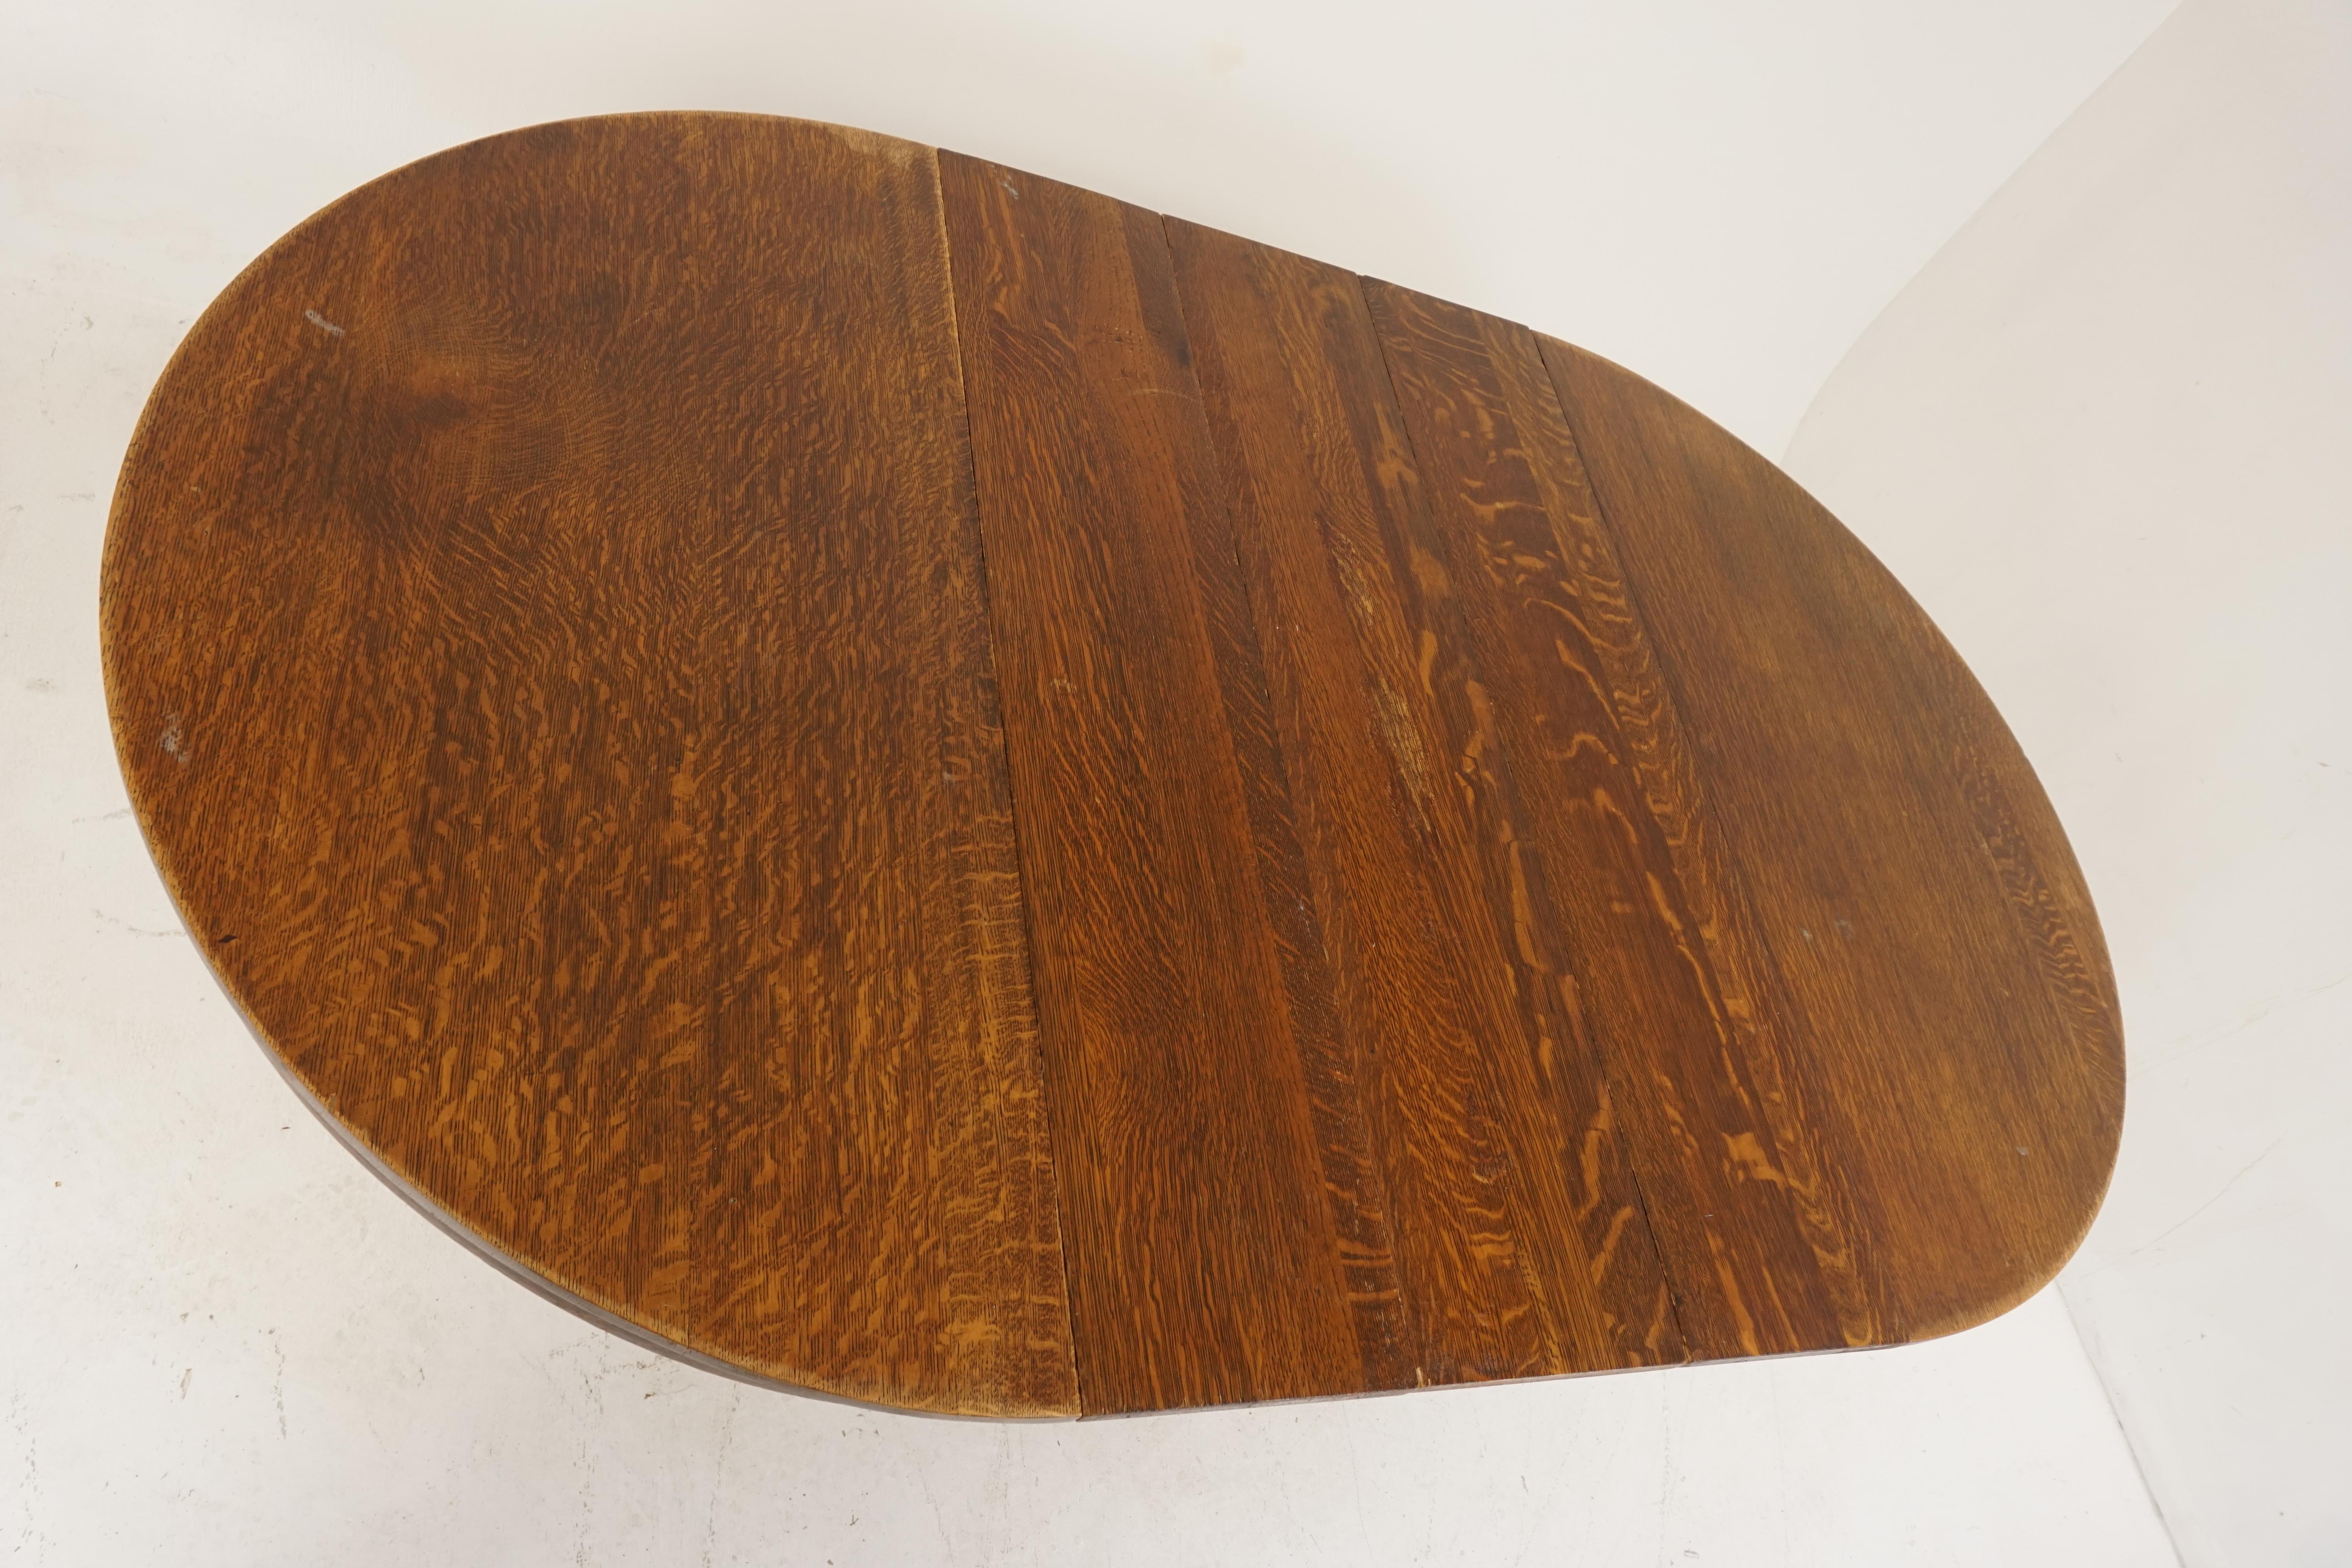 Early 20th Century Antique Round Dining Table, Early American, Oak Table with Leaves, 1910, B2857